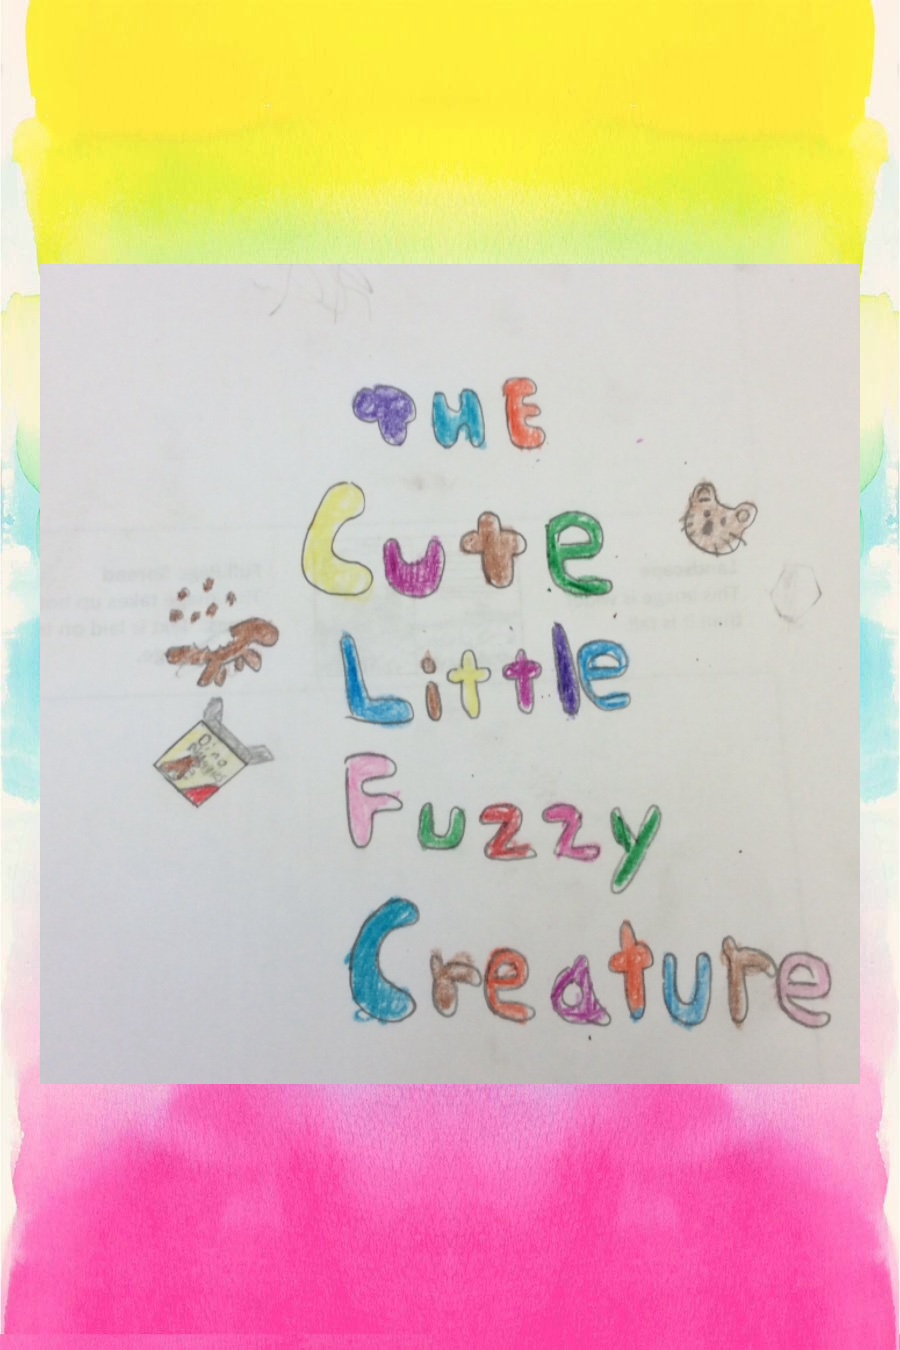 The Cute Little Fuzzy Creature by Isaac C